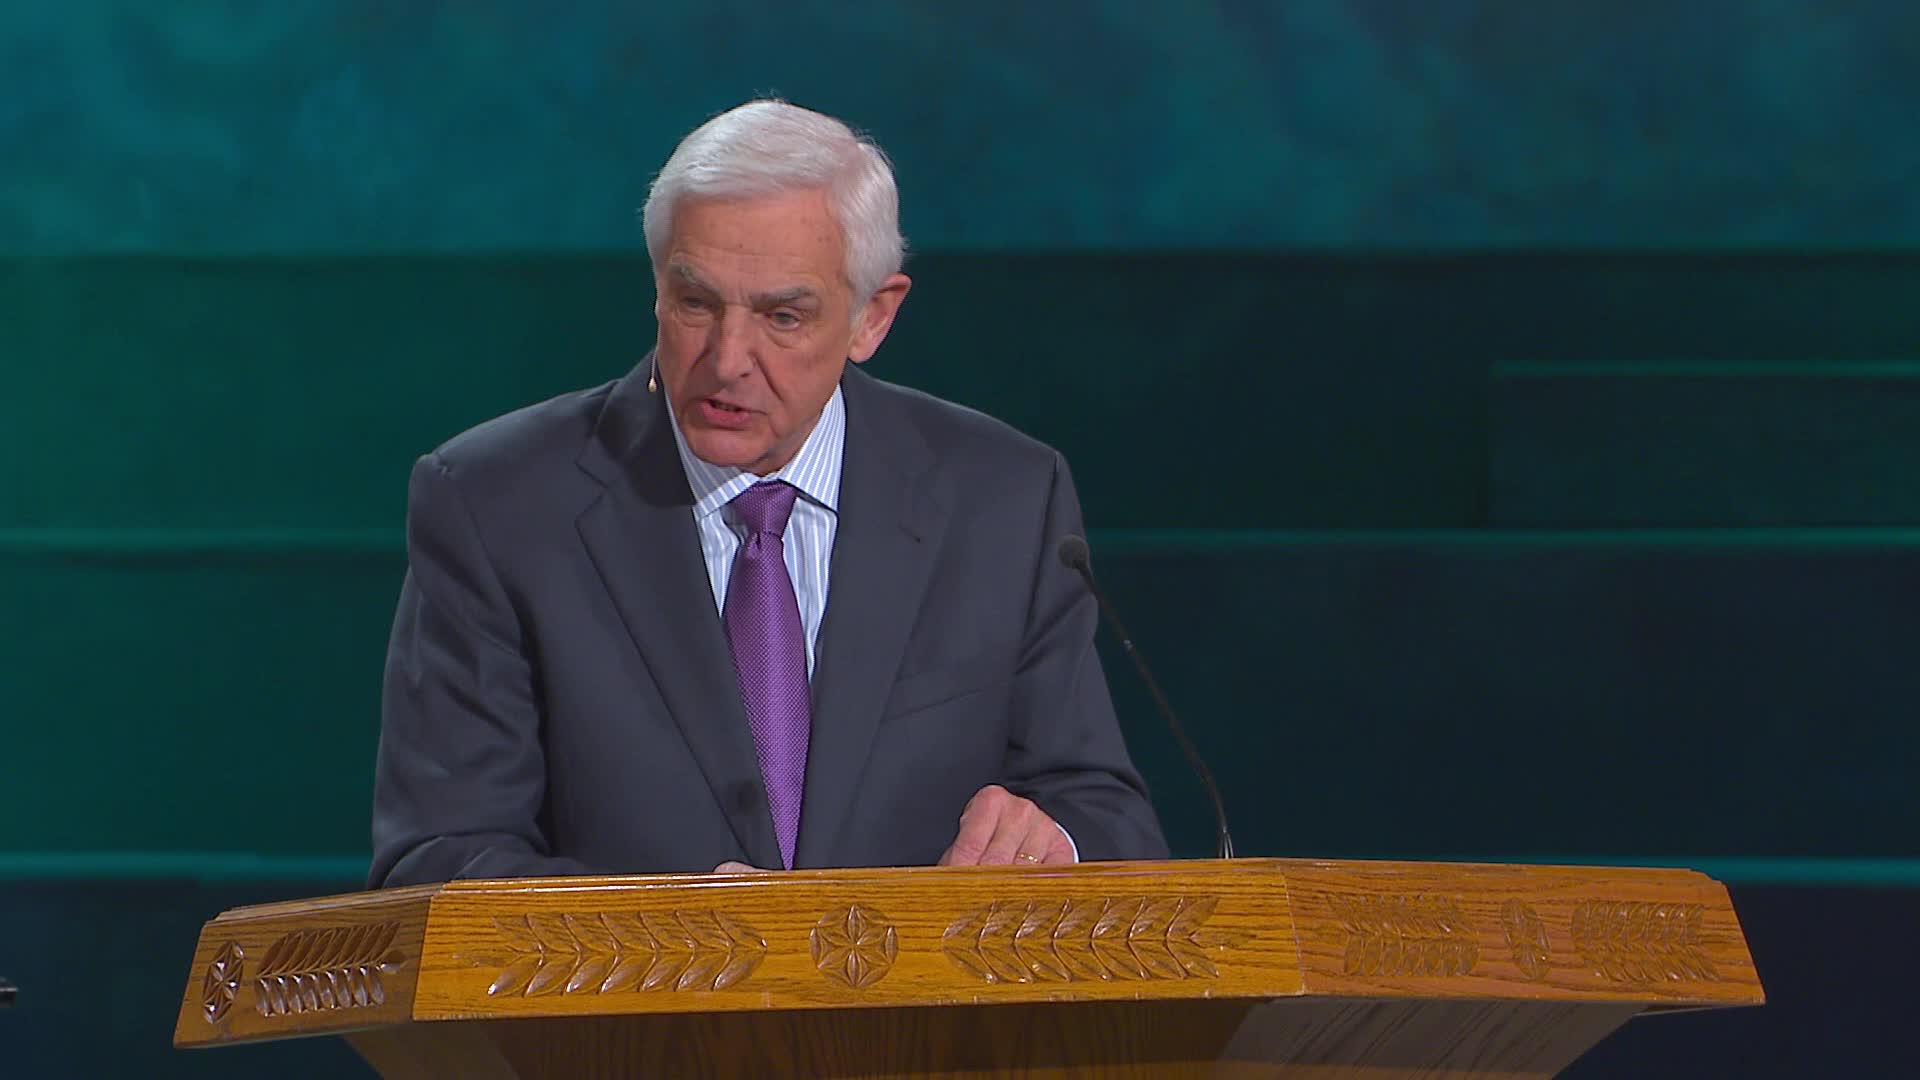 The Vision of the Scroll by Prophecy Academy  with Dr. David Jeremiah